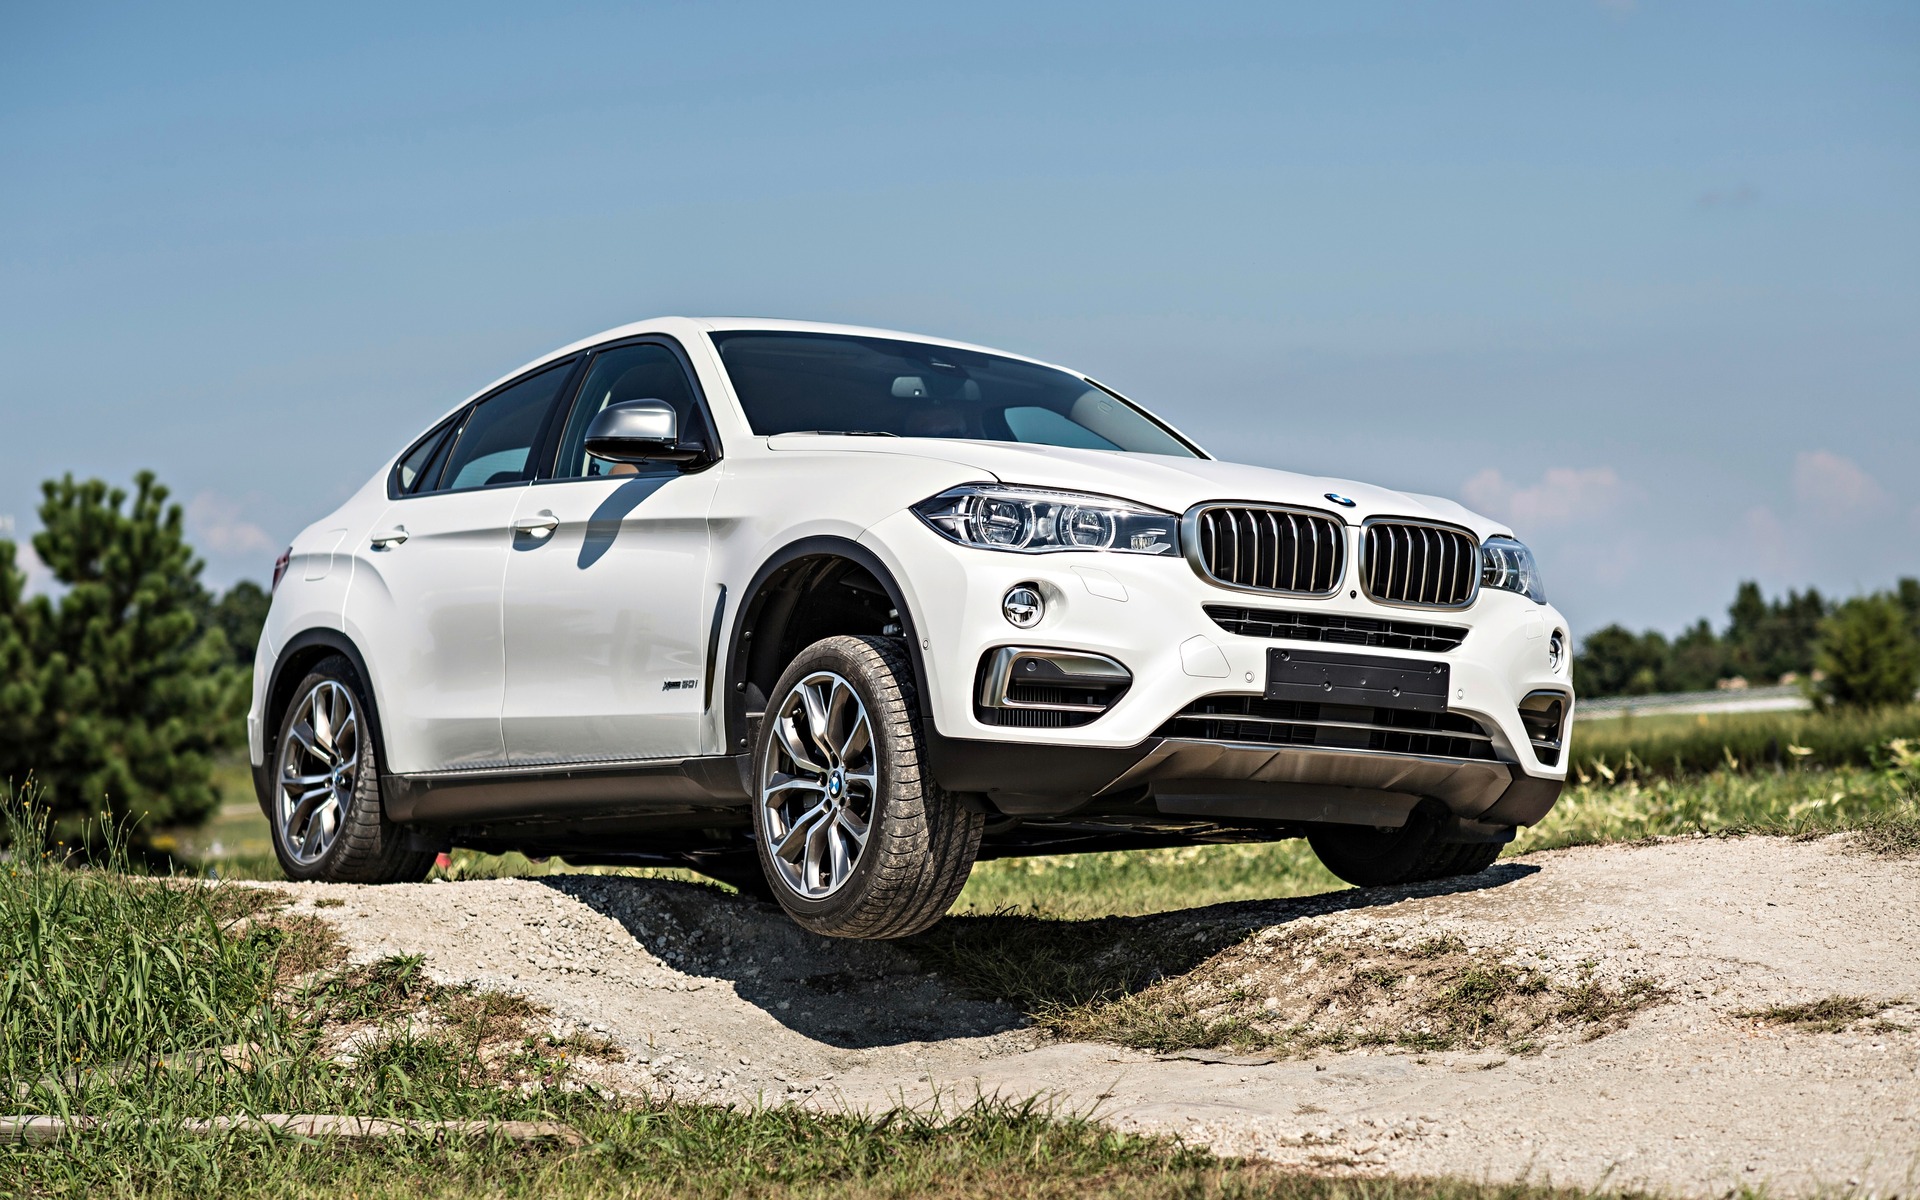 BMW X6 owners won't likely be engaging in too many off-road shenanigans.